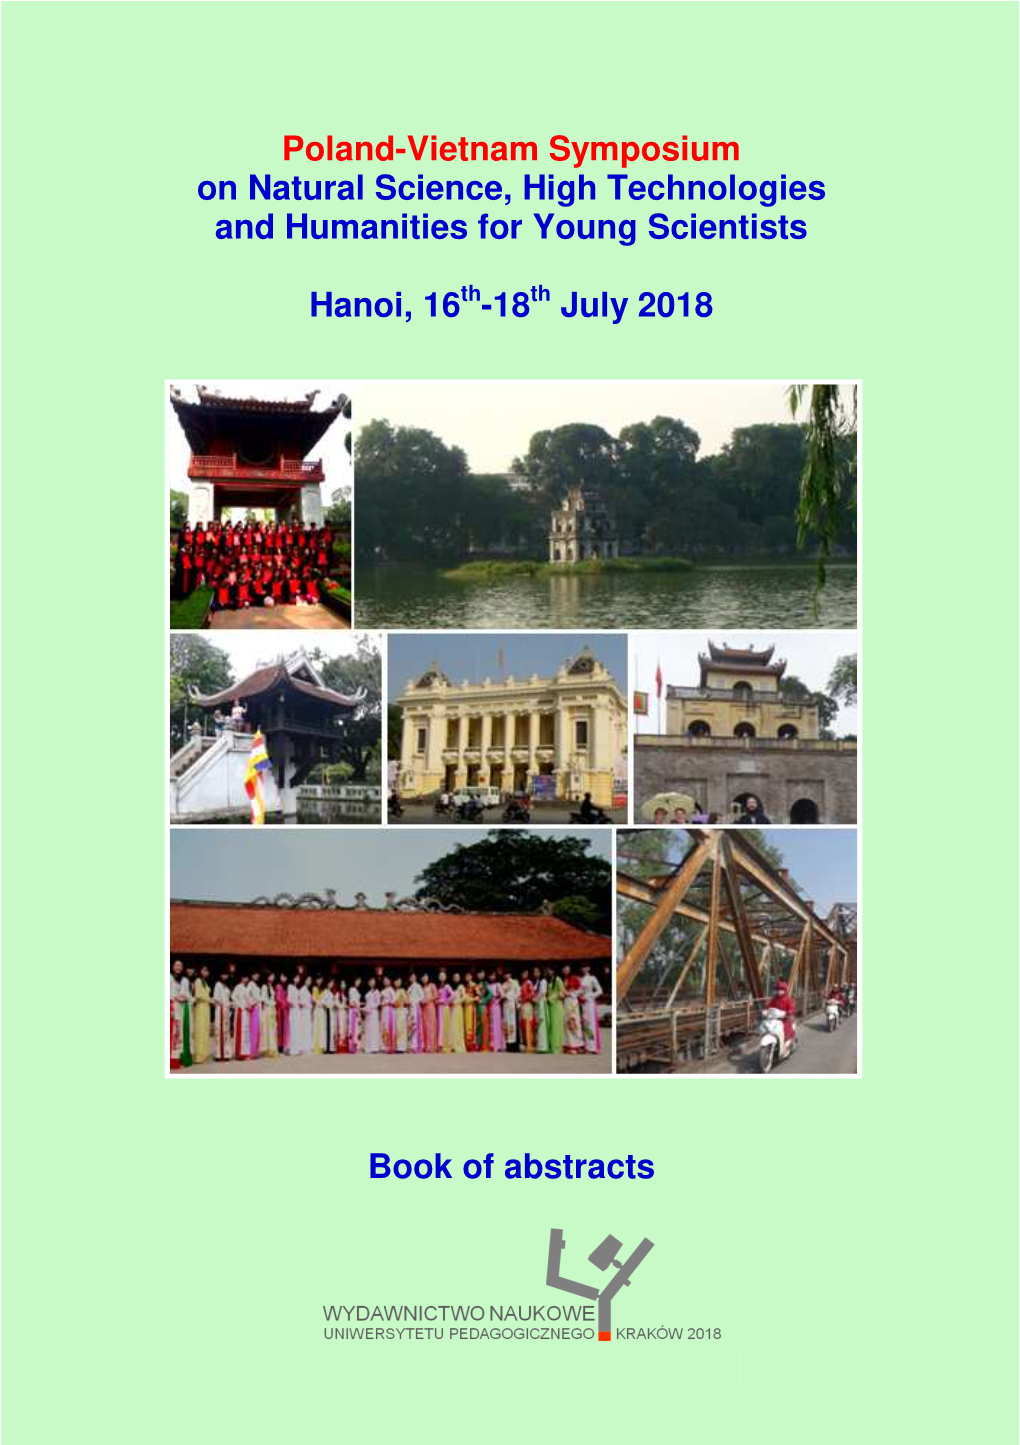 2018.08.15 Polvietsym2018 E-Book of Abstracts